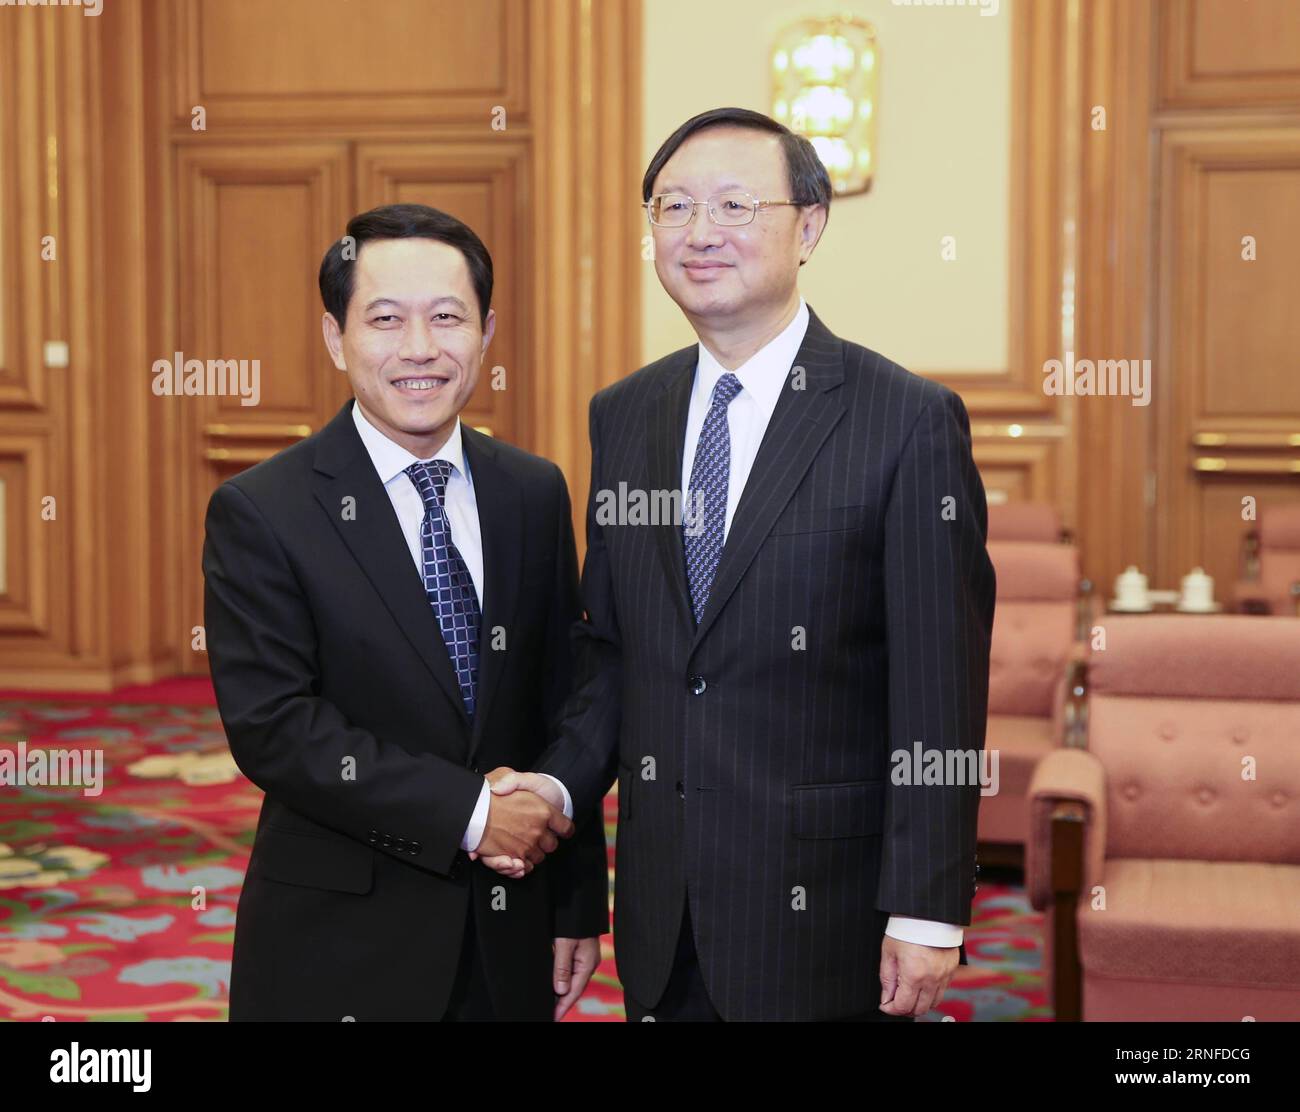 (160802) -- BEIJING, Aug. 2, 2016 -- Chinese State Councilor Yang Jiechi (R) meets with Lao Foreign Minister Saleumxay Kommasith in Beijing, capital of China, Aug. 2, 2016. ) (mp) CHINA-BEIJING-YANG JIECHI-LAO FM-MEETING (CN) DingxLin PUBLICATIONxNOTxINxCHN   160802 Beijing Aug 2 2016 Chinese State Councilors Yang Jiechi r Meets With LAO Foreign Ministers Saleumxay Kommasith in Beijing Capital of China Aug 2 2016 MP China Beijing Yang Jiechi LAO FM Meeting CN DingxLin PUBLICATIONxNOTxINxCHN Stock Photo